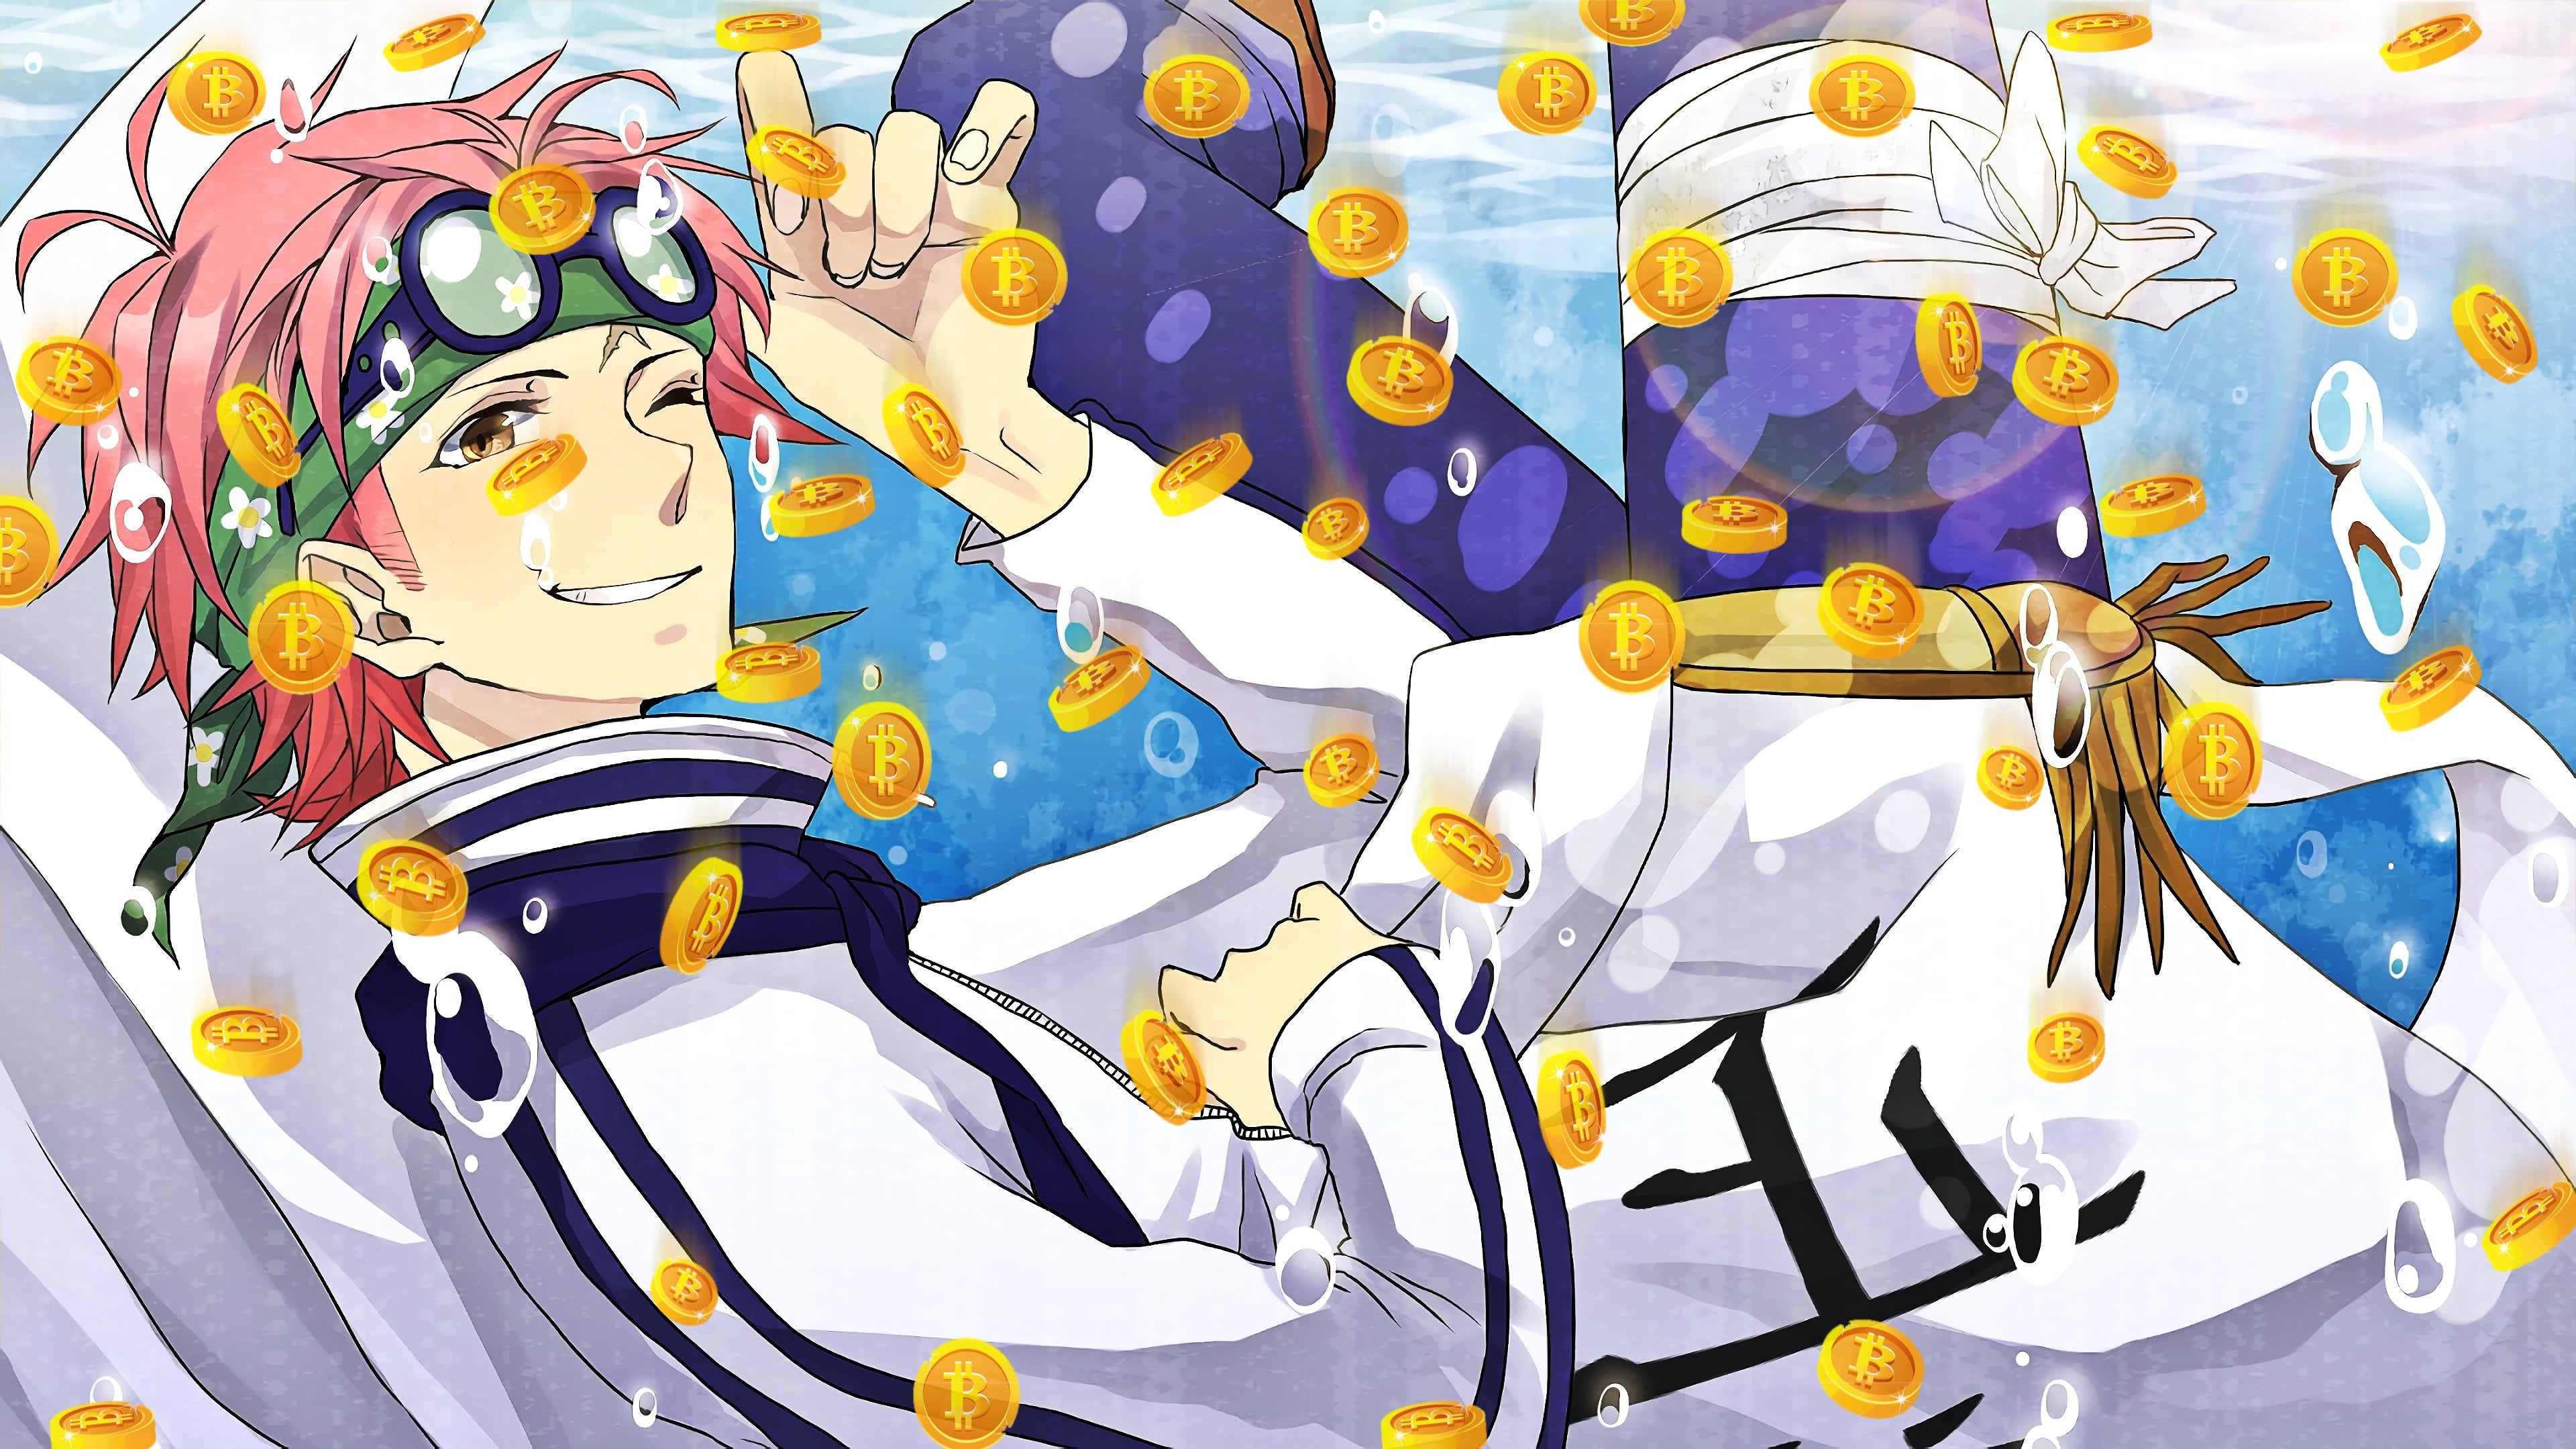 Bitcoins From Above Coby One Piece B26110 Wallpaper: BitcoinWallpaper